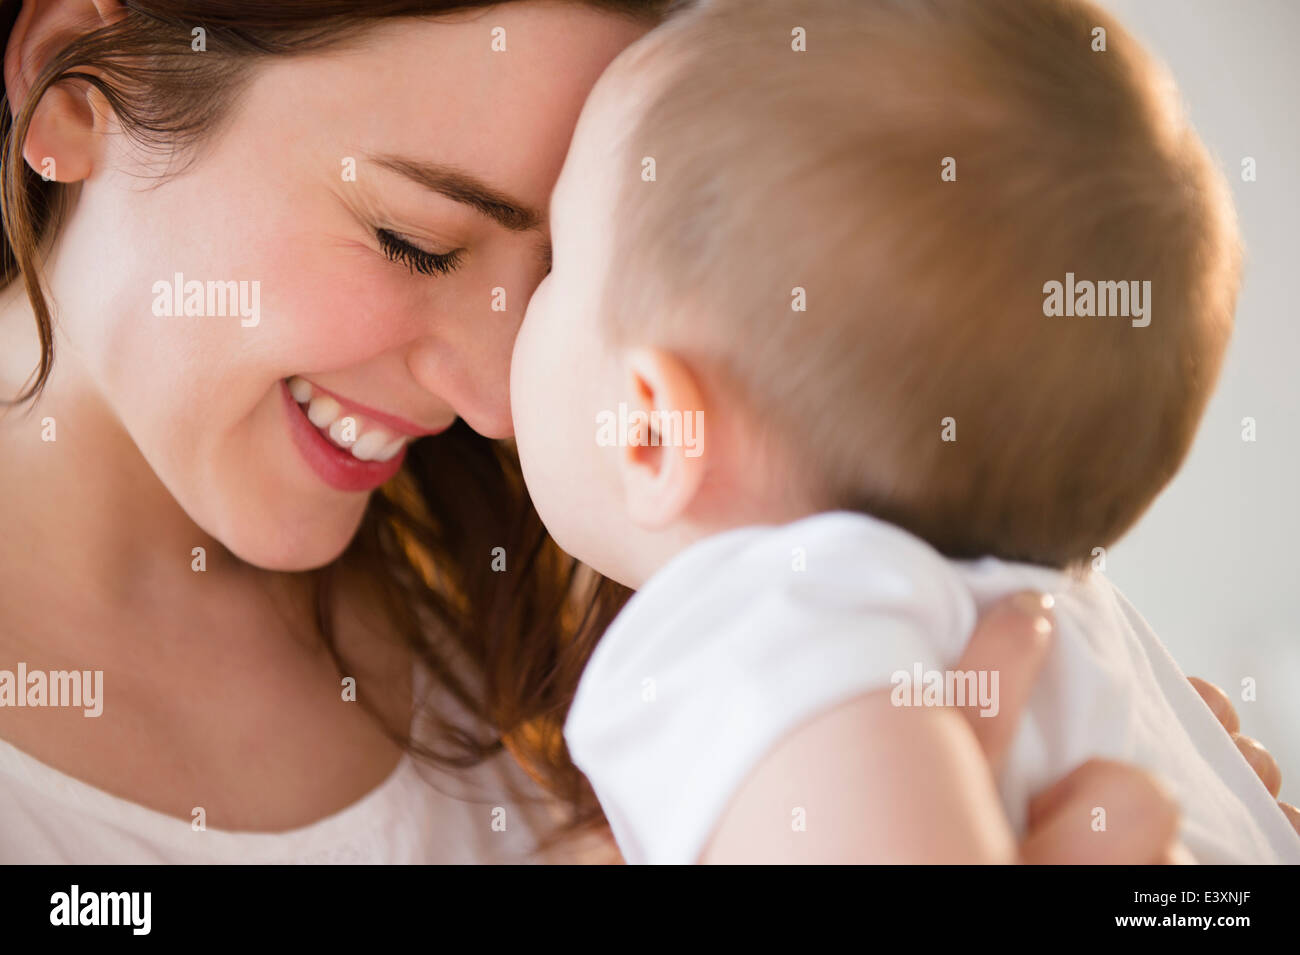 Smiling mother cradling baby Banque D'Images